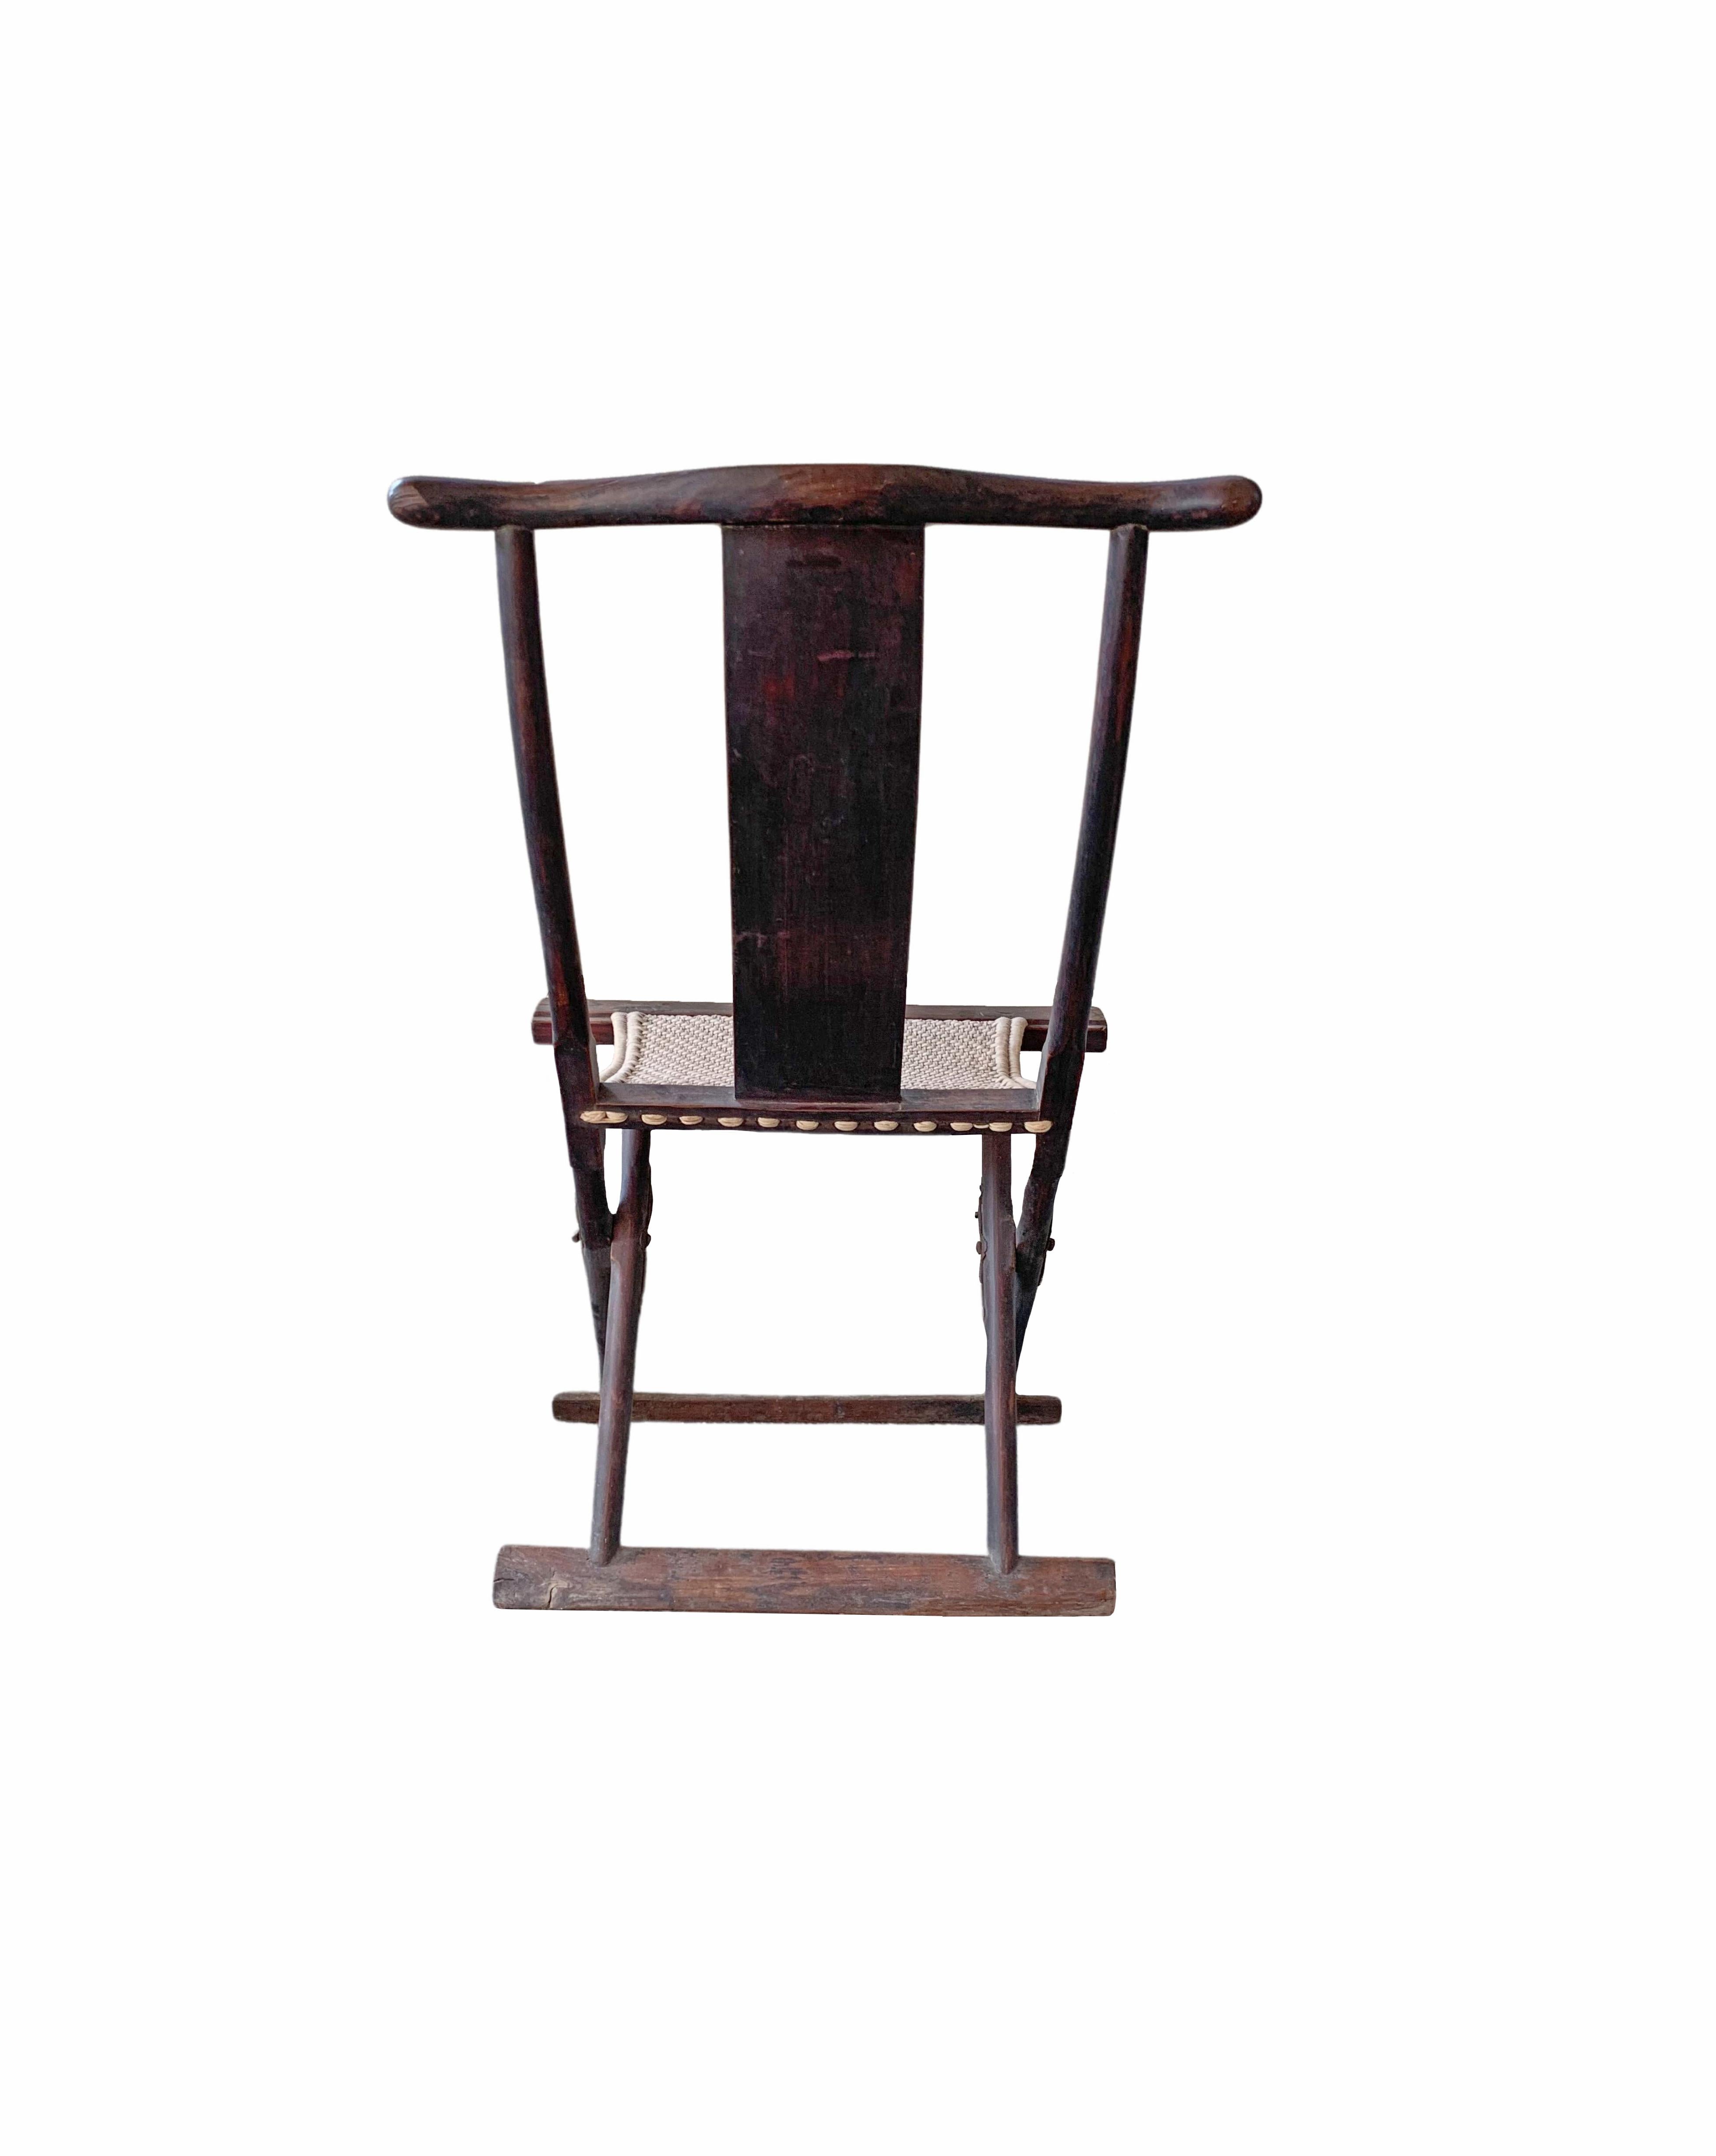 19th Century Antique Chinese Folding Chair with Woven Fabric Seat, c. 1900 For Sale